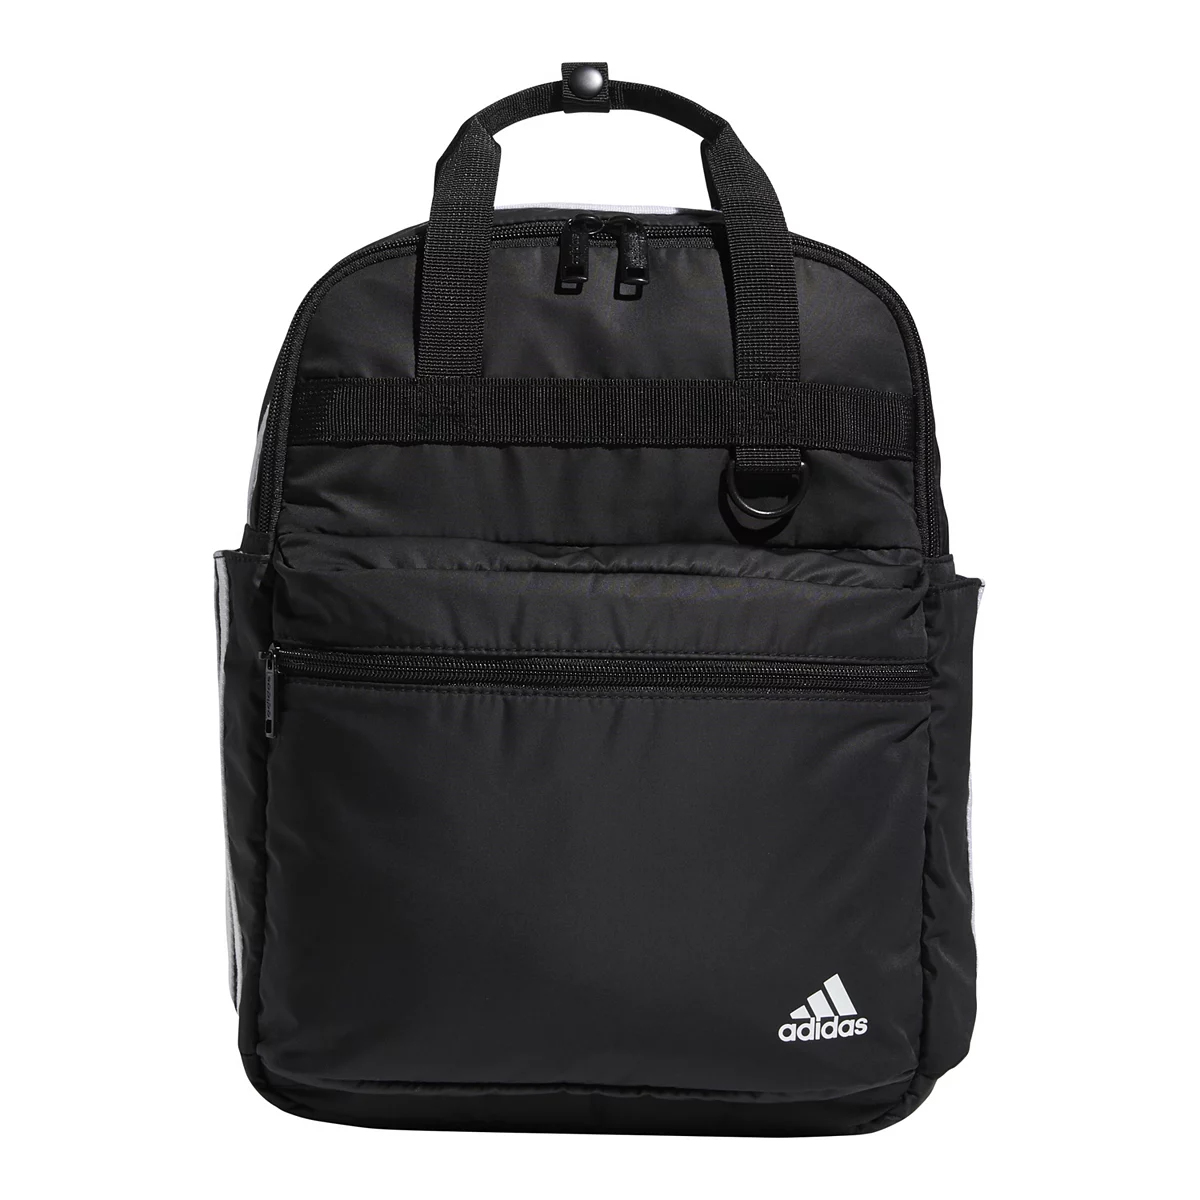 Adidas Essentials 2 Backpack Front View